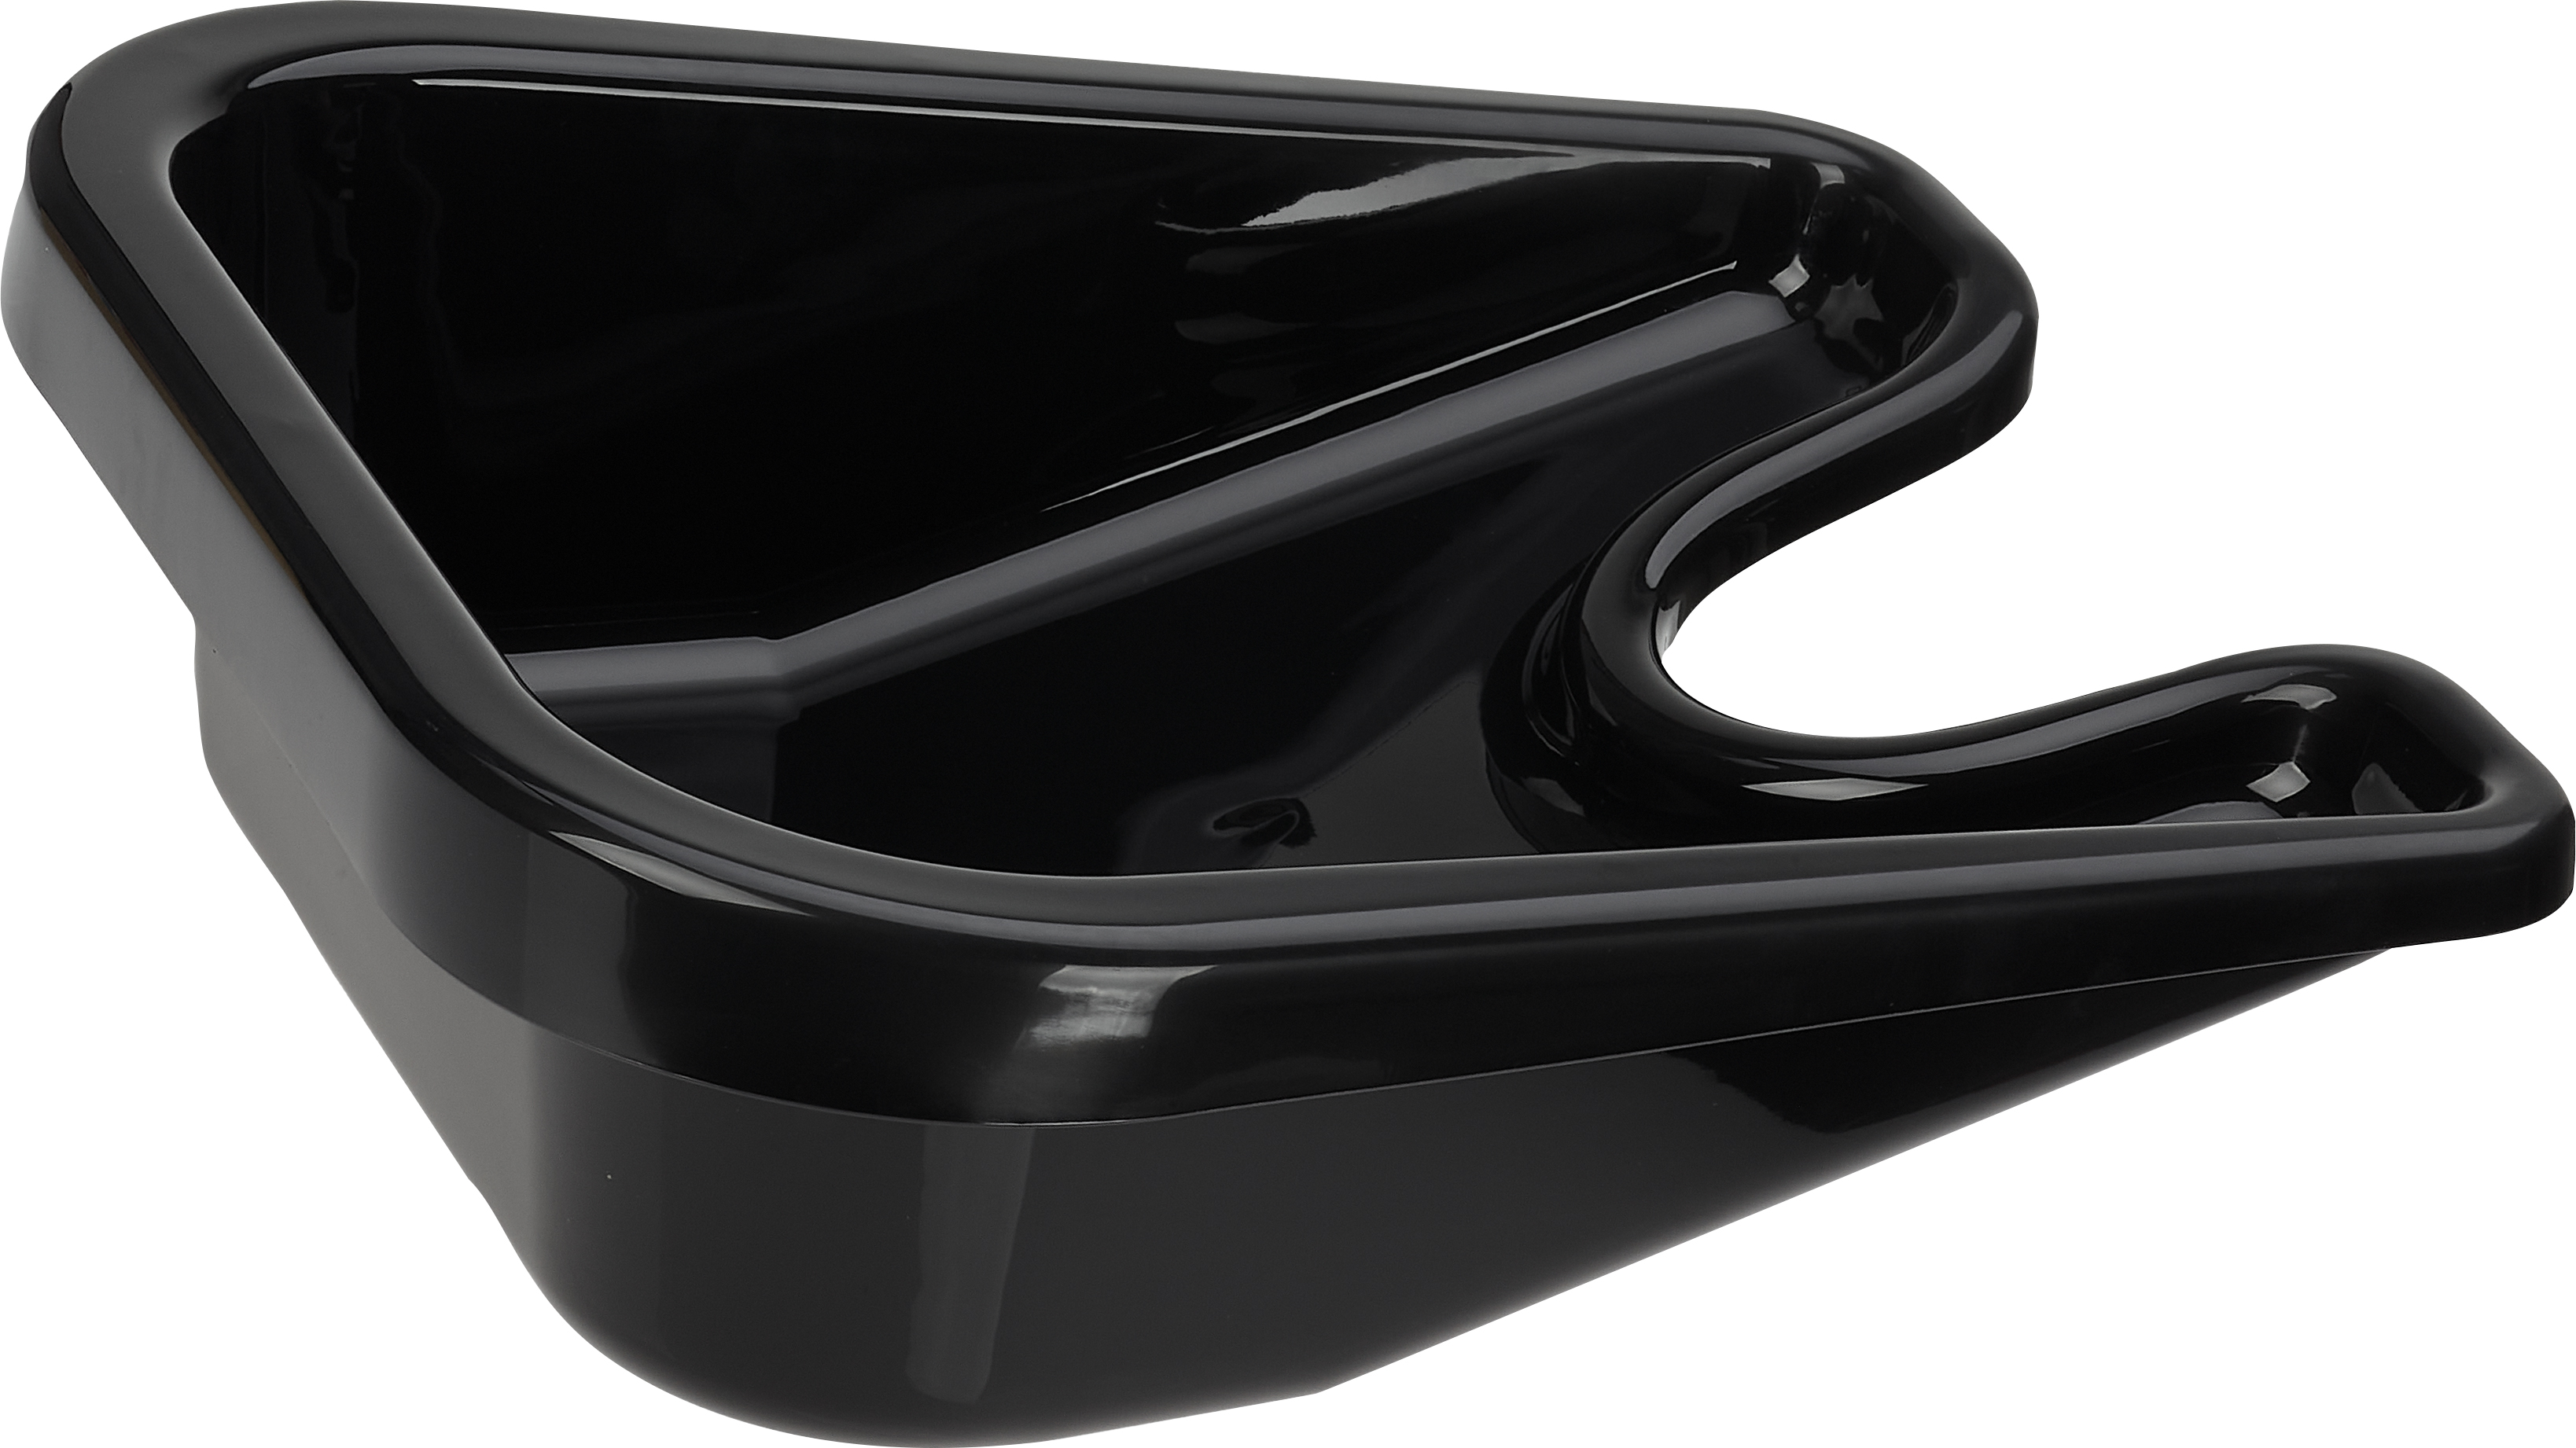 Replacement basin for shallow sink